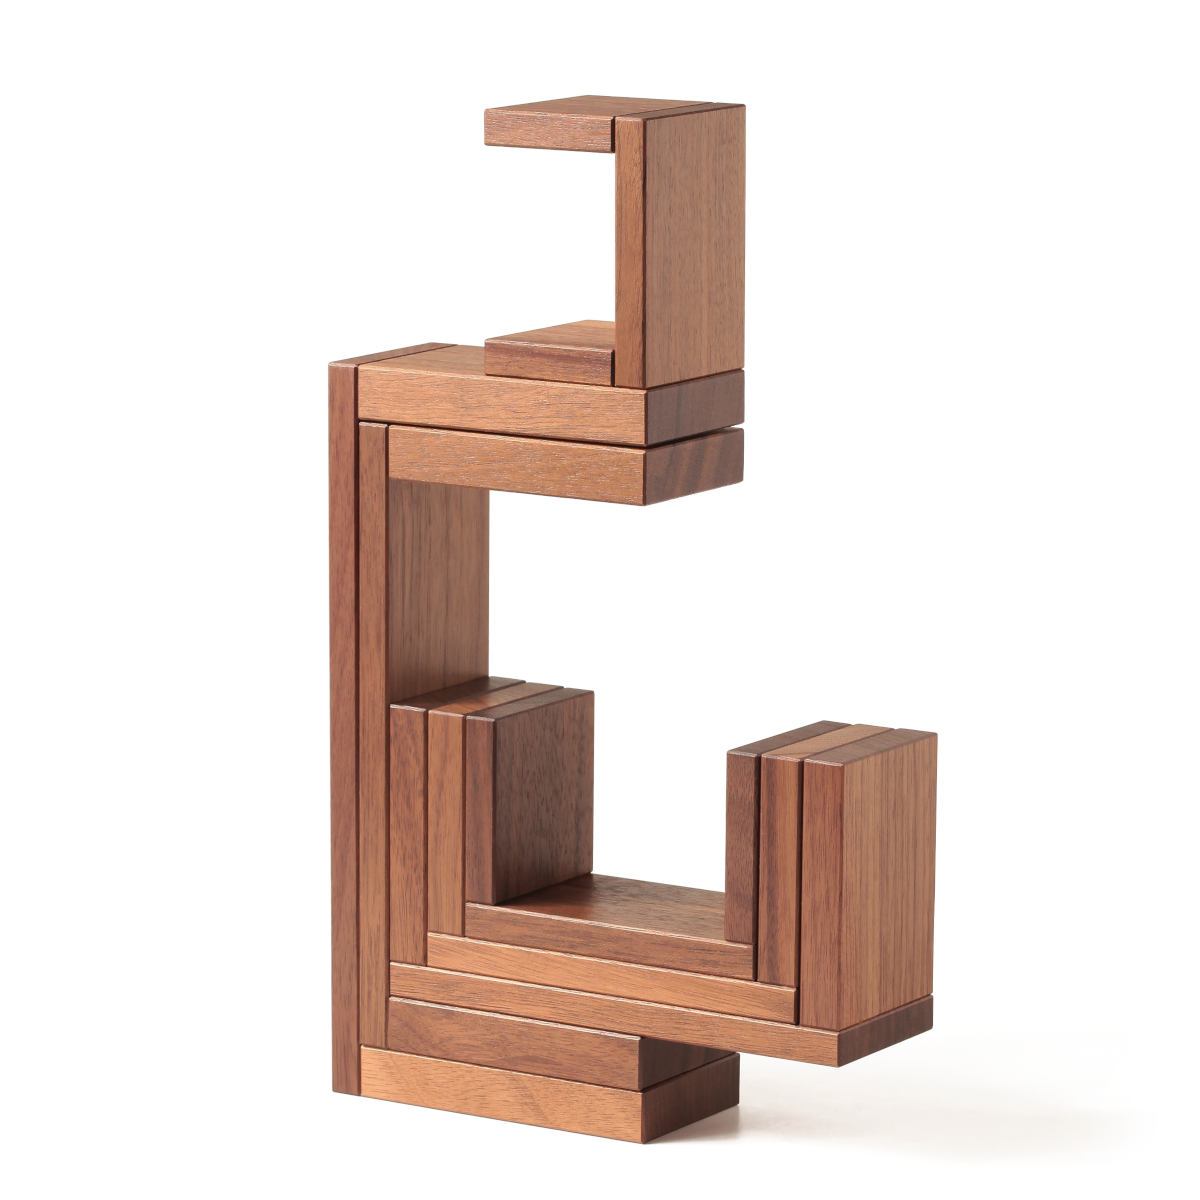 LIMITED: Corus (First Edition) – Original Naef Toy made of Wood for Standing and Hanging Constructions